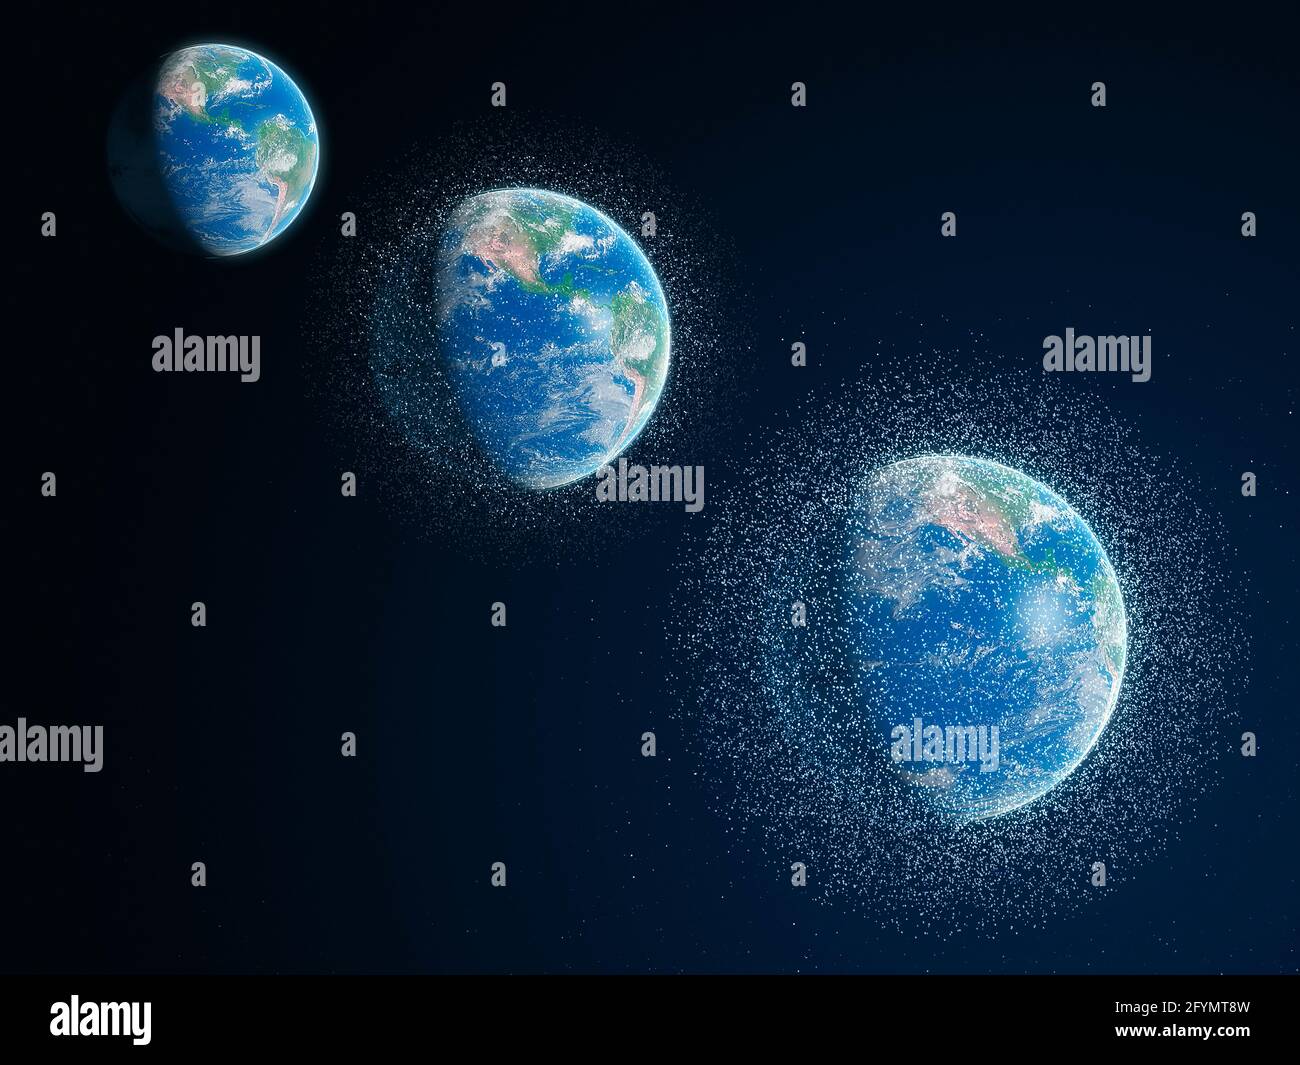 Space junk over time, illustration Stock Photo